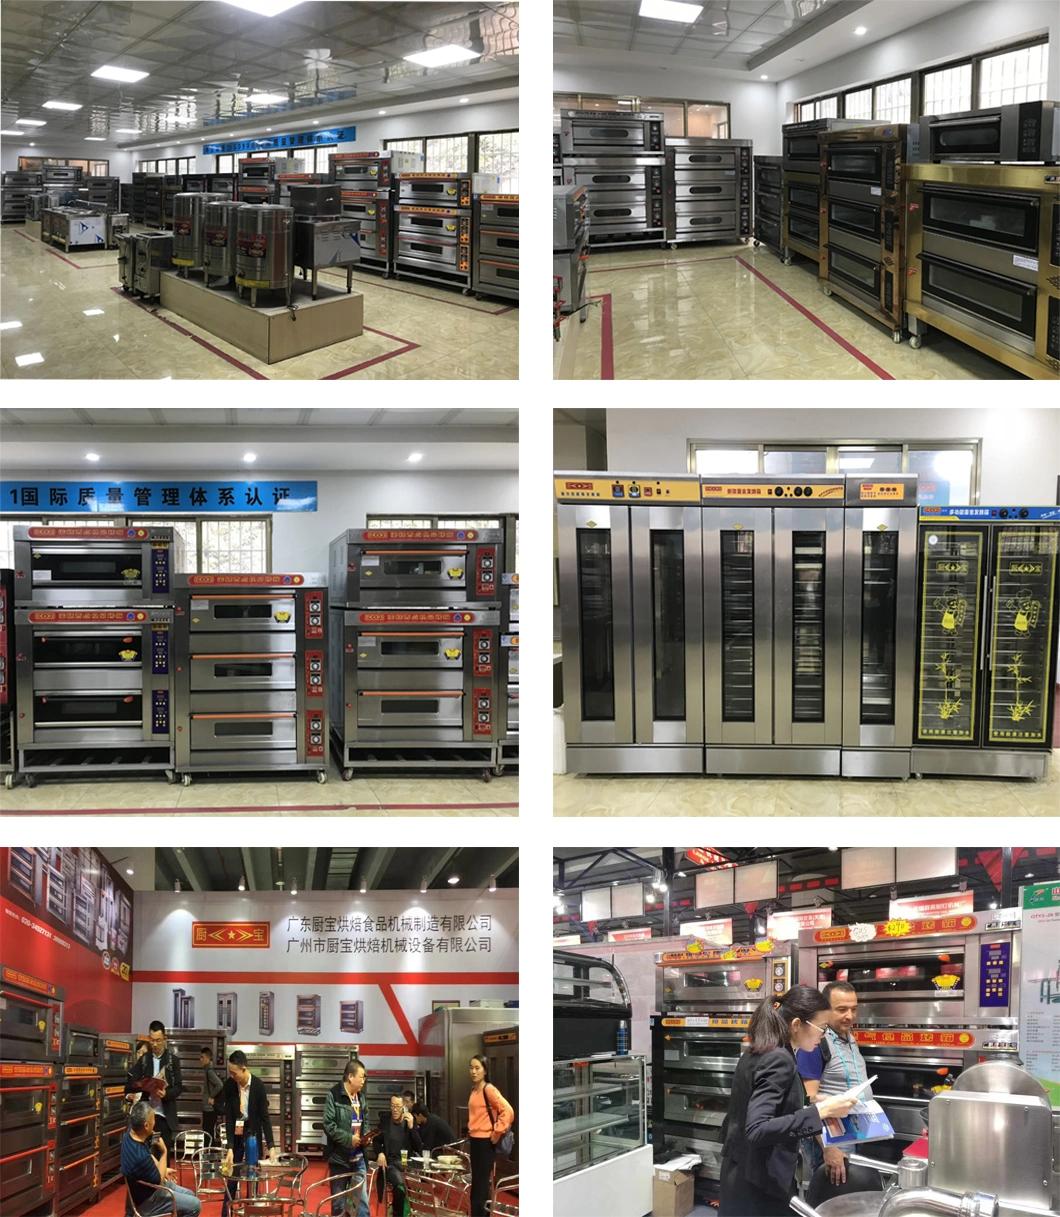 1 Deck 2 Trays Electric Pizza Oven for Commercial Kitchen Baking Equipment Bakery Machine Food Machinery